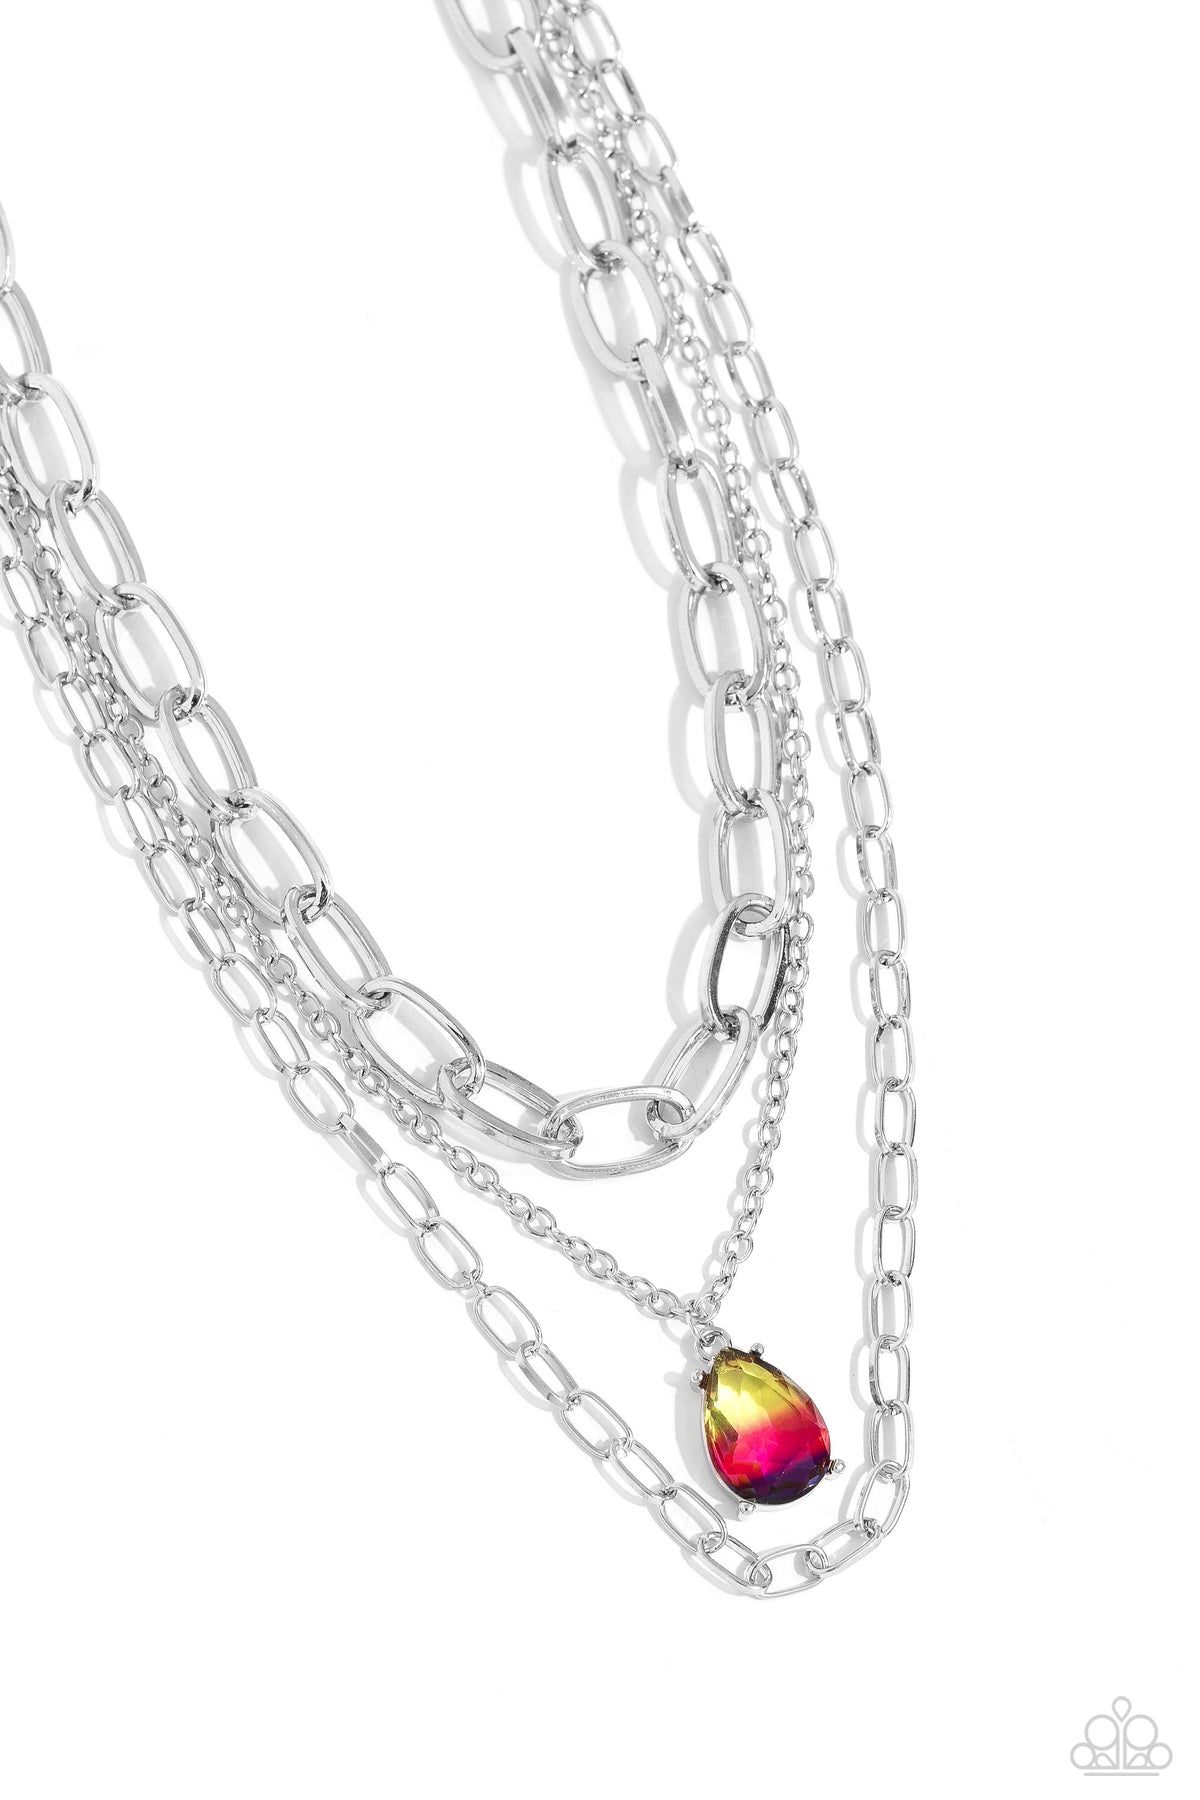 Teardrop Tiers Multi Ombre Yellow Gem and Silver Chain Necklace - Paparazzi Accessories- lightbox - CarasShop.com - $5 Jewelry by Cara Jewels